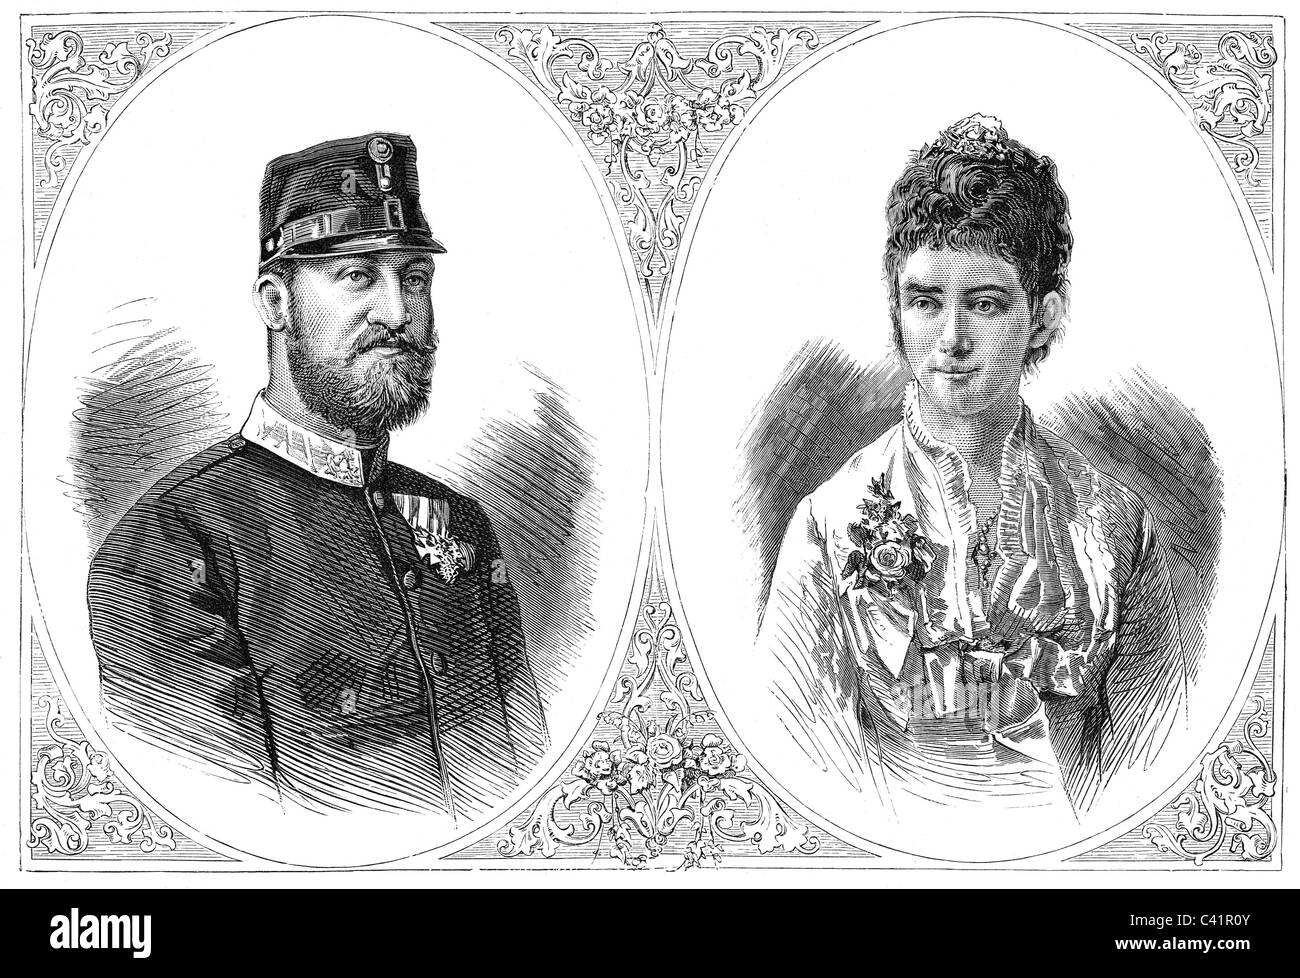 Ernest Augustus, 21.9.1845 - 14.11.1923, 3rd Duke of Cumberland and Teviotdale 1878 - 1919, portrait, with a portrait of his fiancee, Princess Thyra of Denmark, wood engraving, published in 1878, Stock Photo